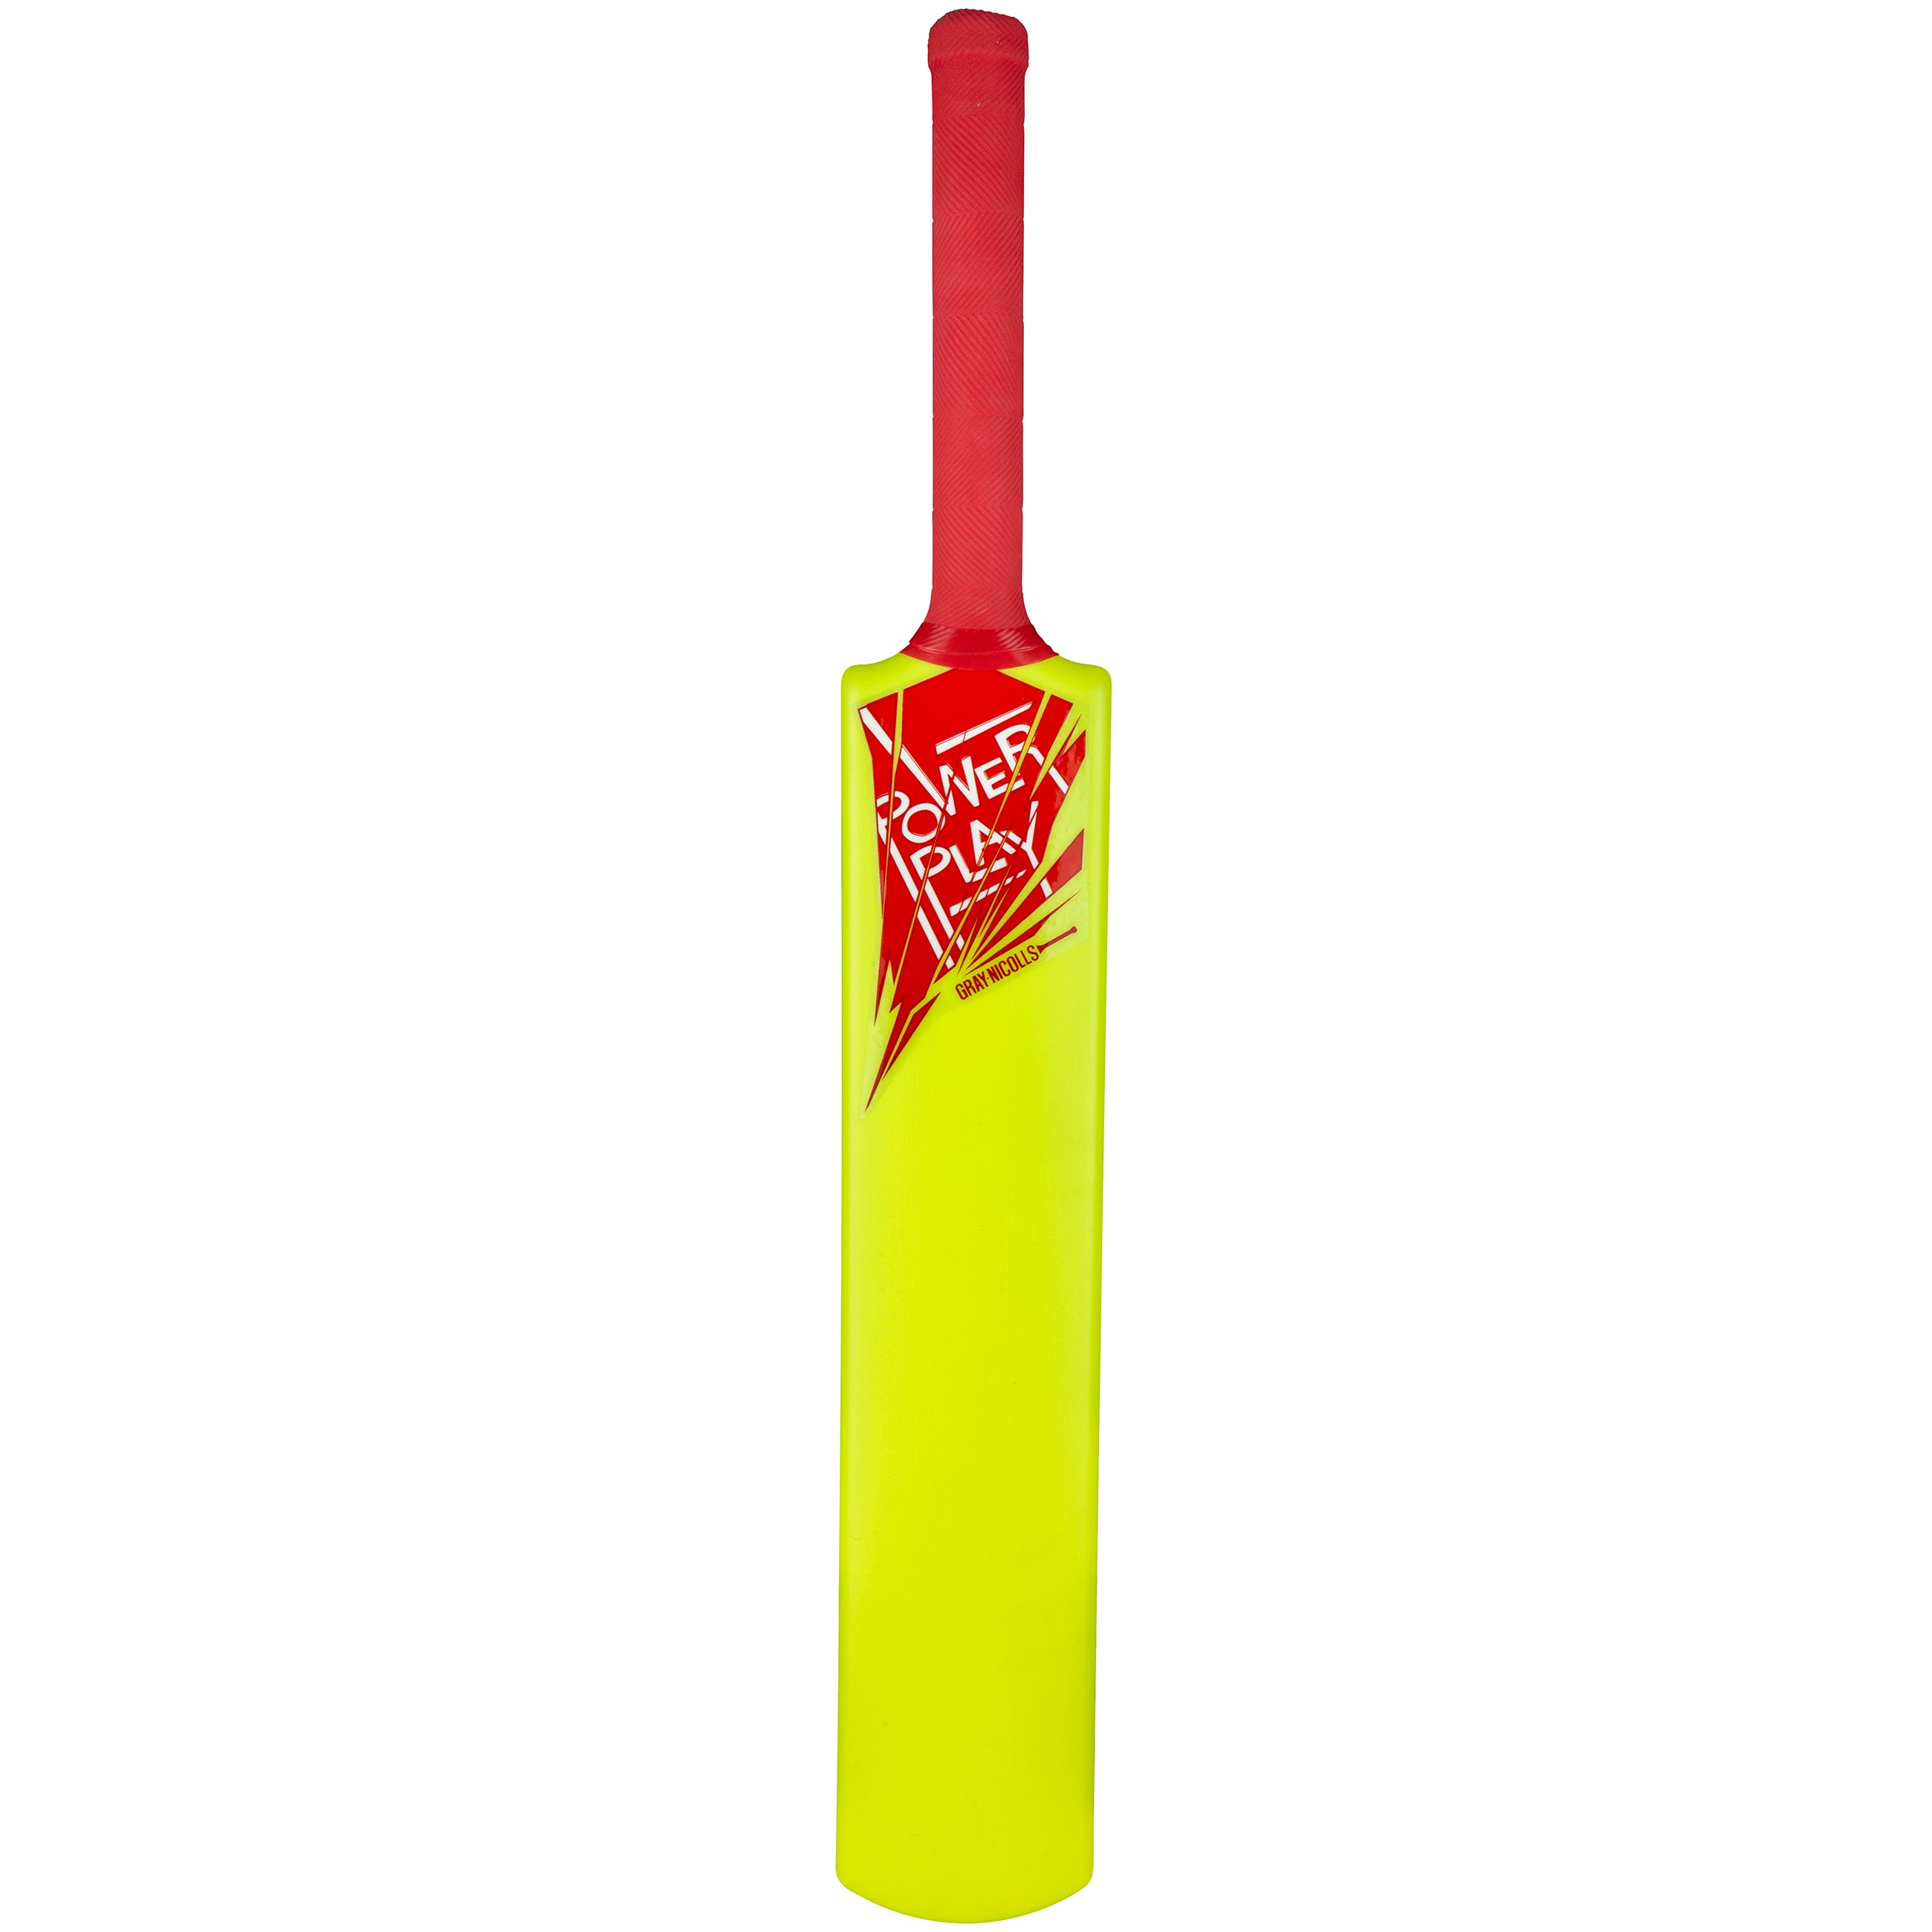 2600 CNBA20 5802552 Plastic Power Play Bat Yellow Size 4 Front